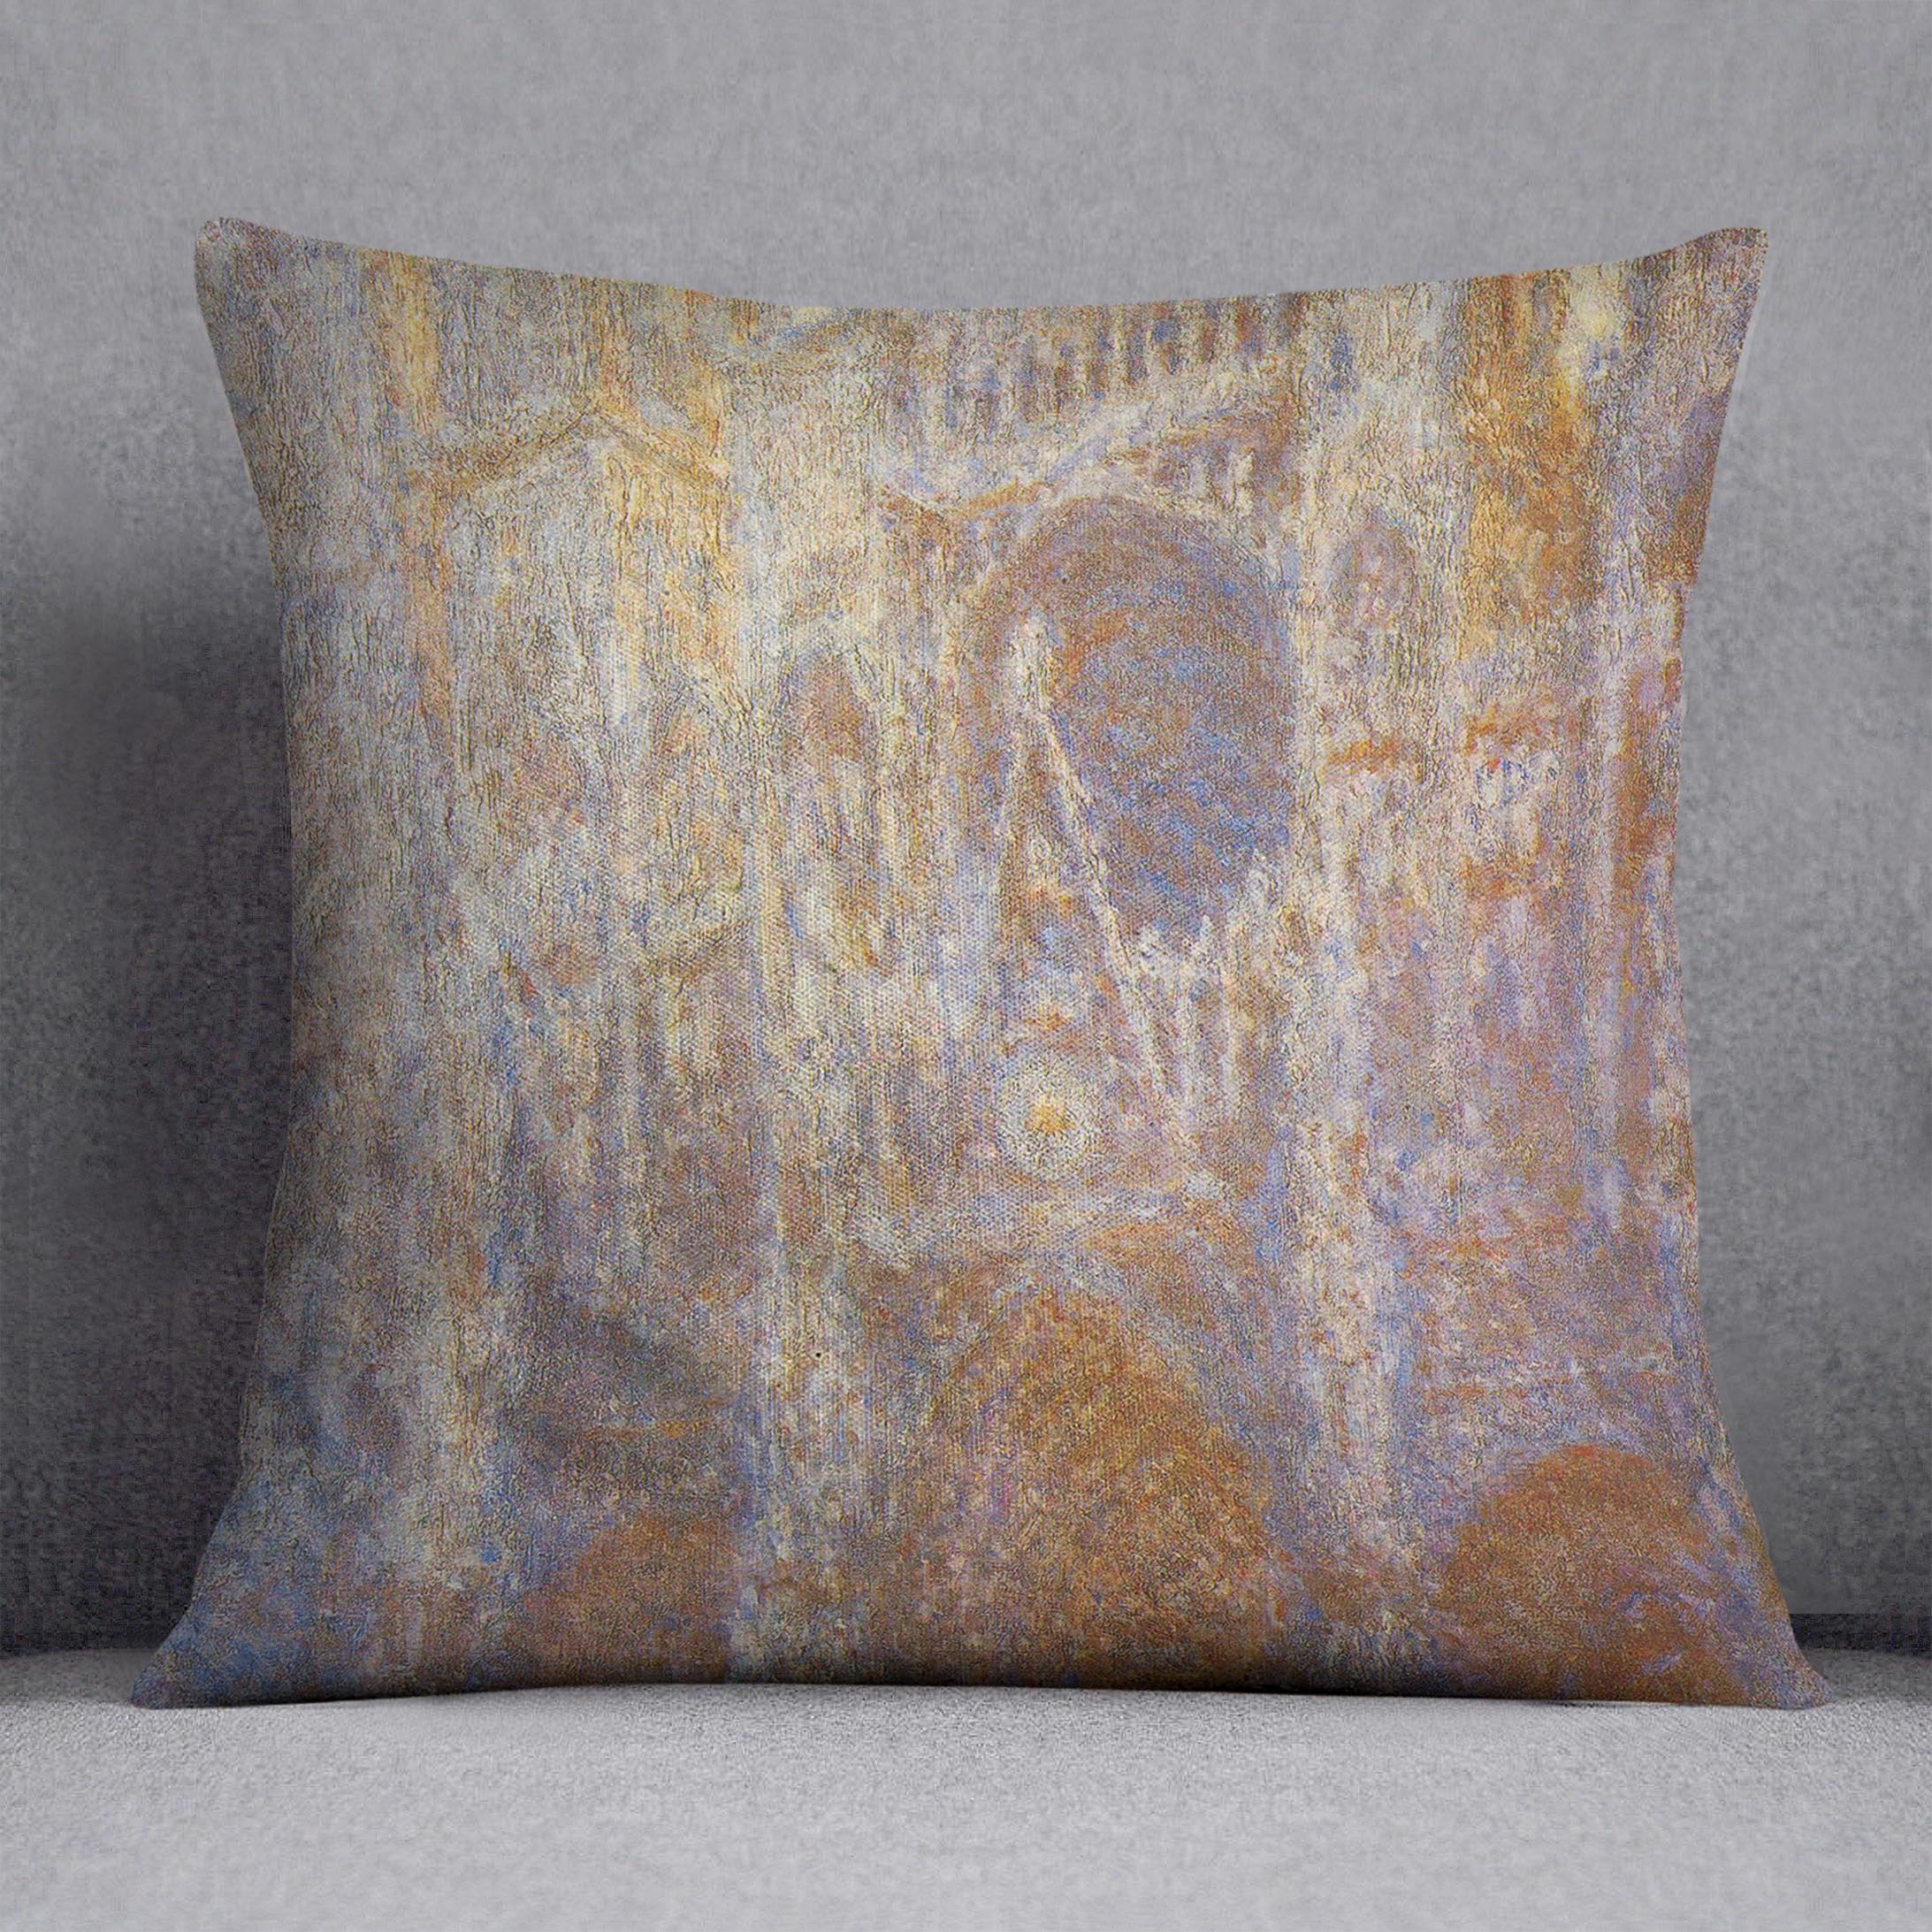 The Rouen Cathedral West facade by Monet Throw Pillow